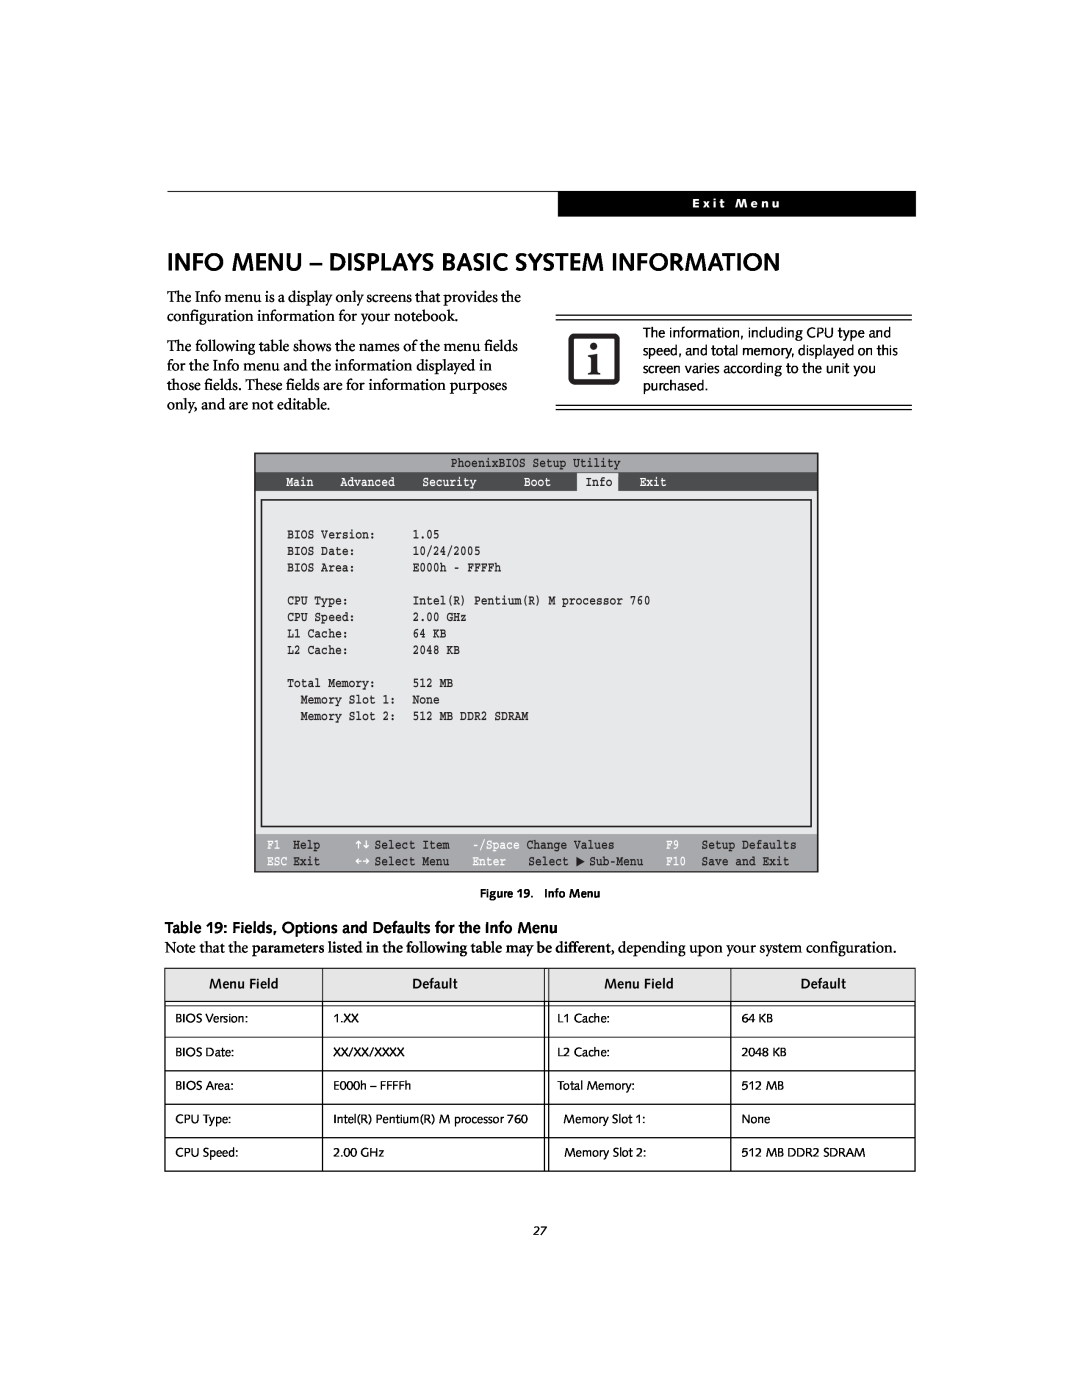 Fujitsu S7020D manual Info Menu - Displays Basic System Information, Fields, Options and Defaults for the Info Menu 